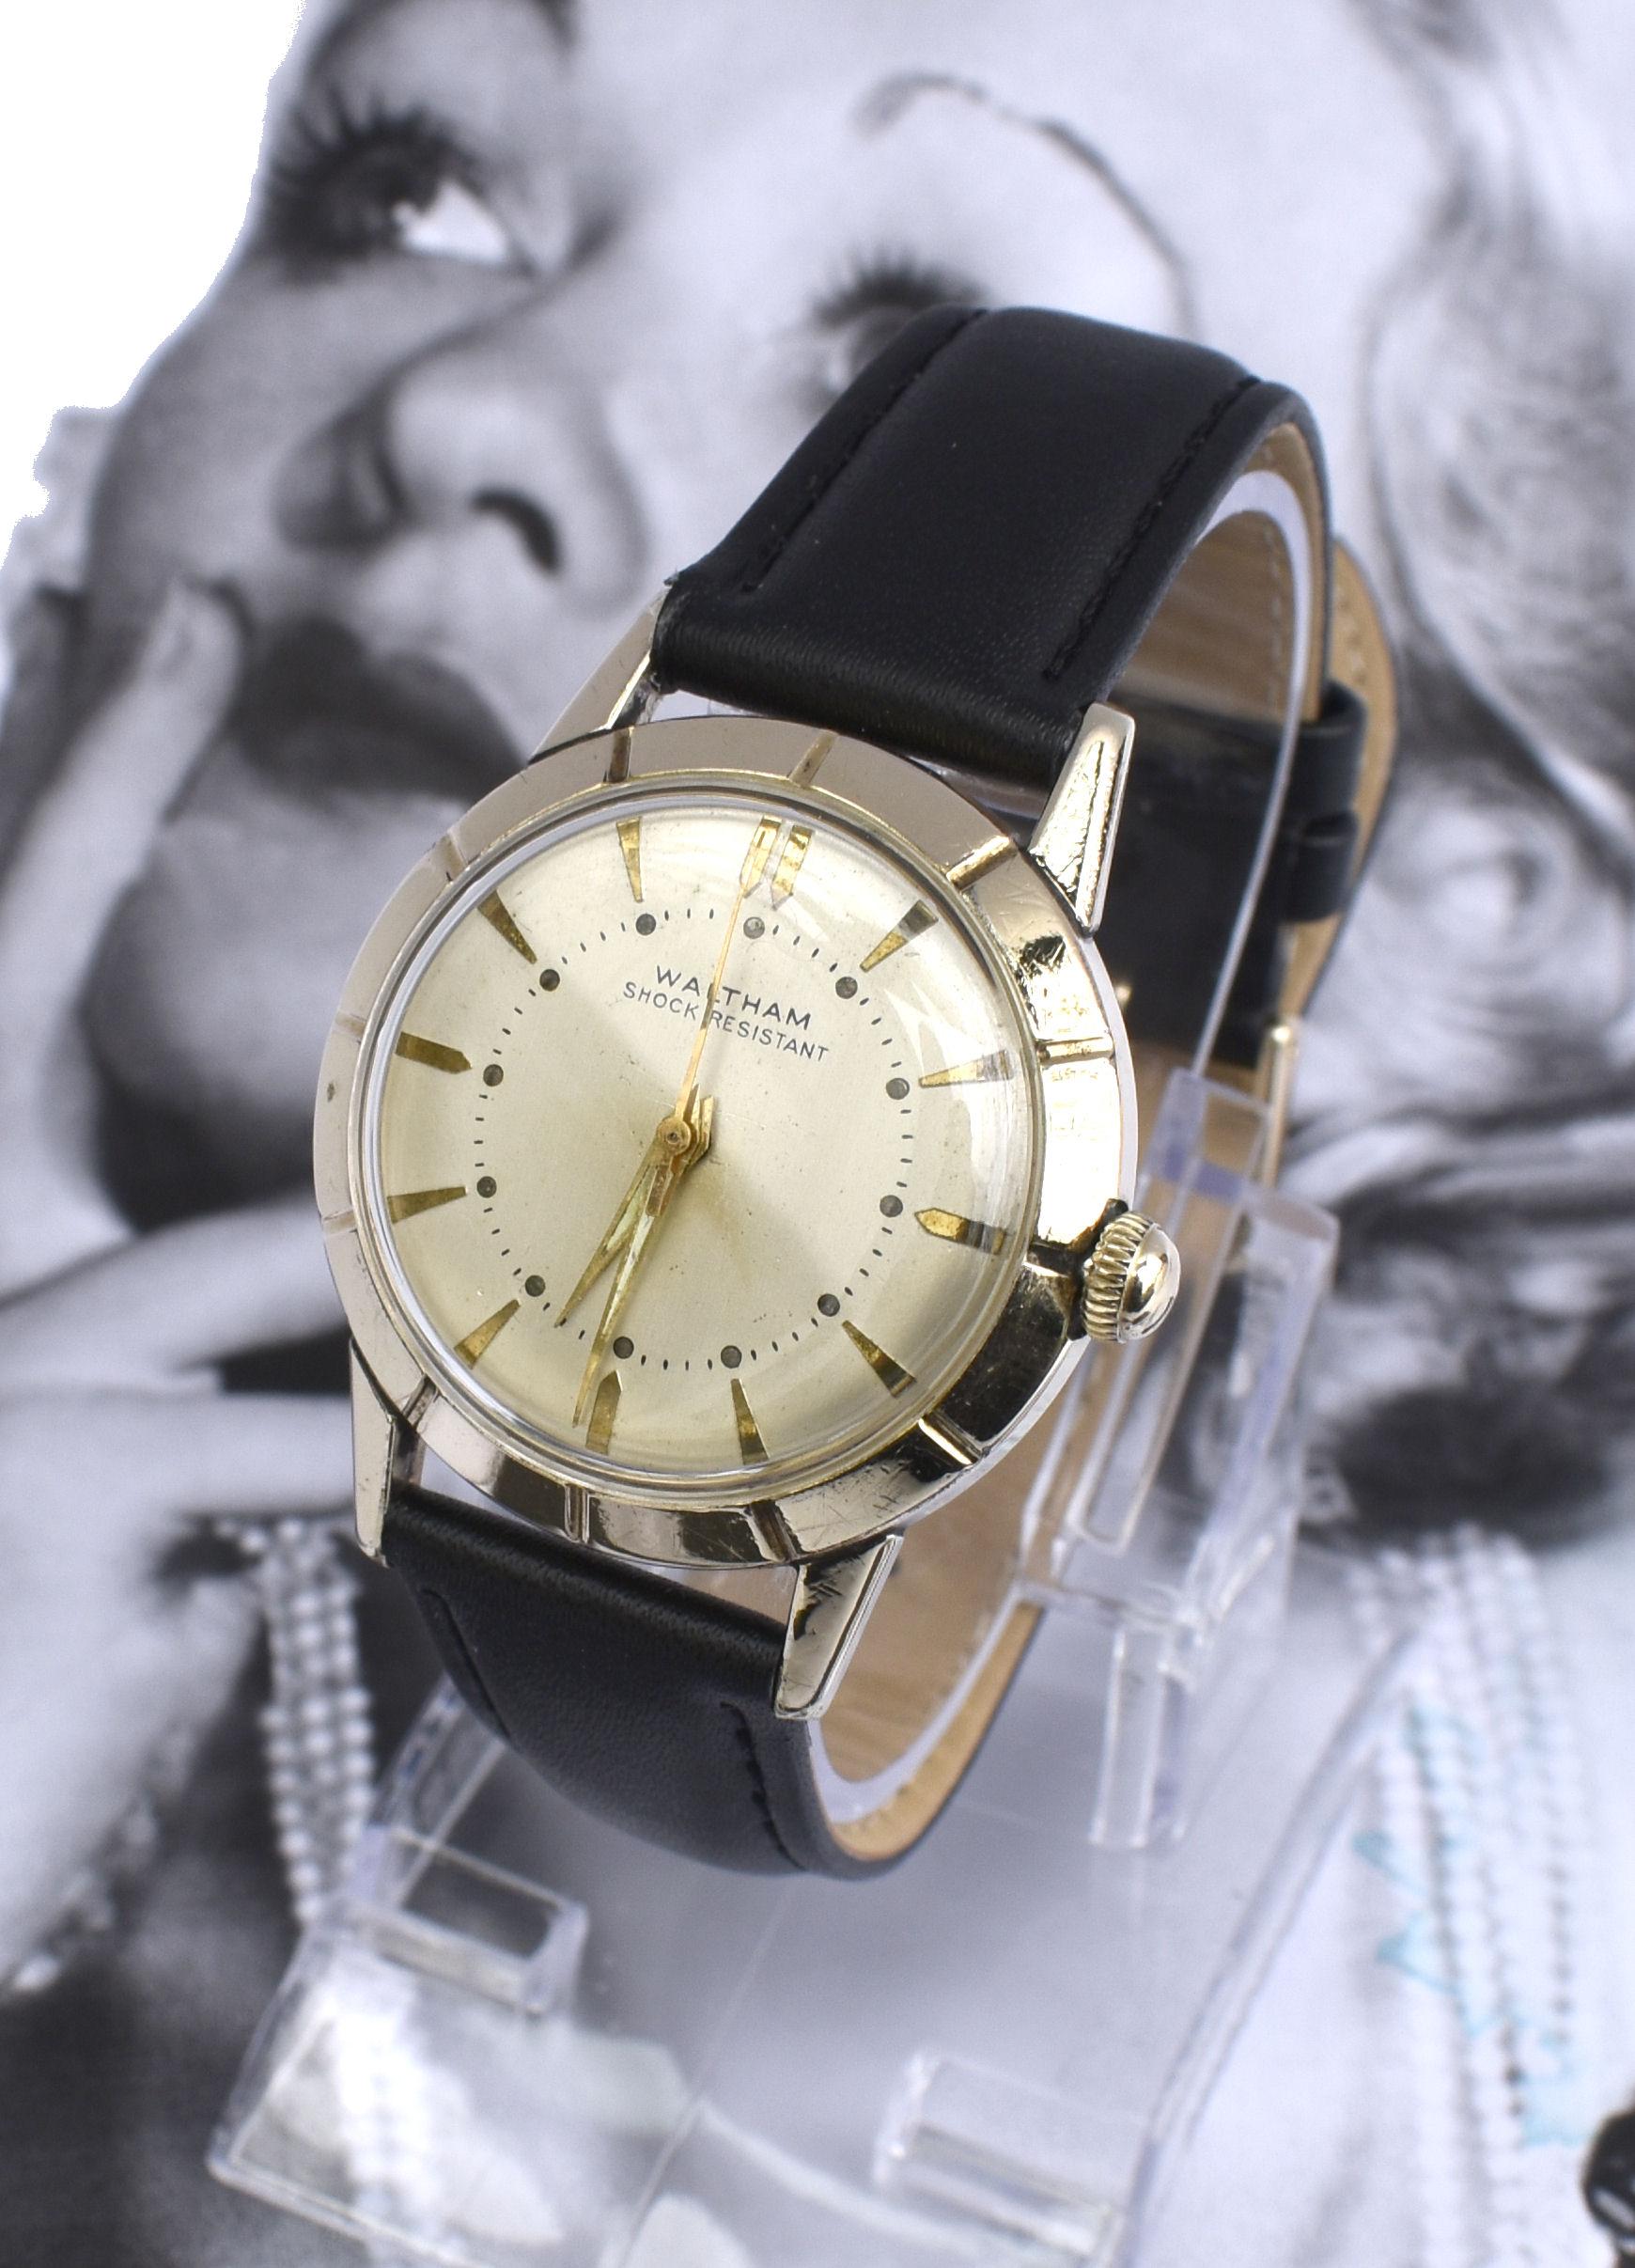 For your consideration is this fabulously stylish Art Deco late 1940's Gents manual wrist watch by the American watch company Waltham. Very attractive watch that has been care for over the years which has resulted in a very good condition vintage